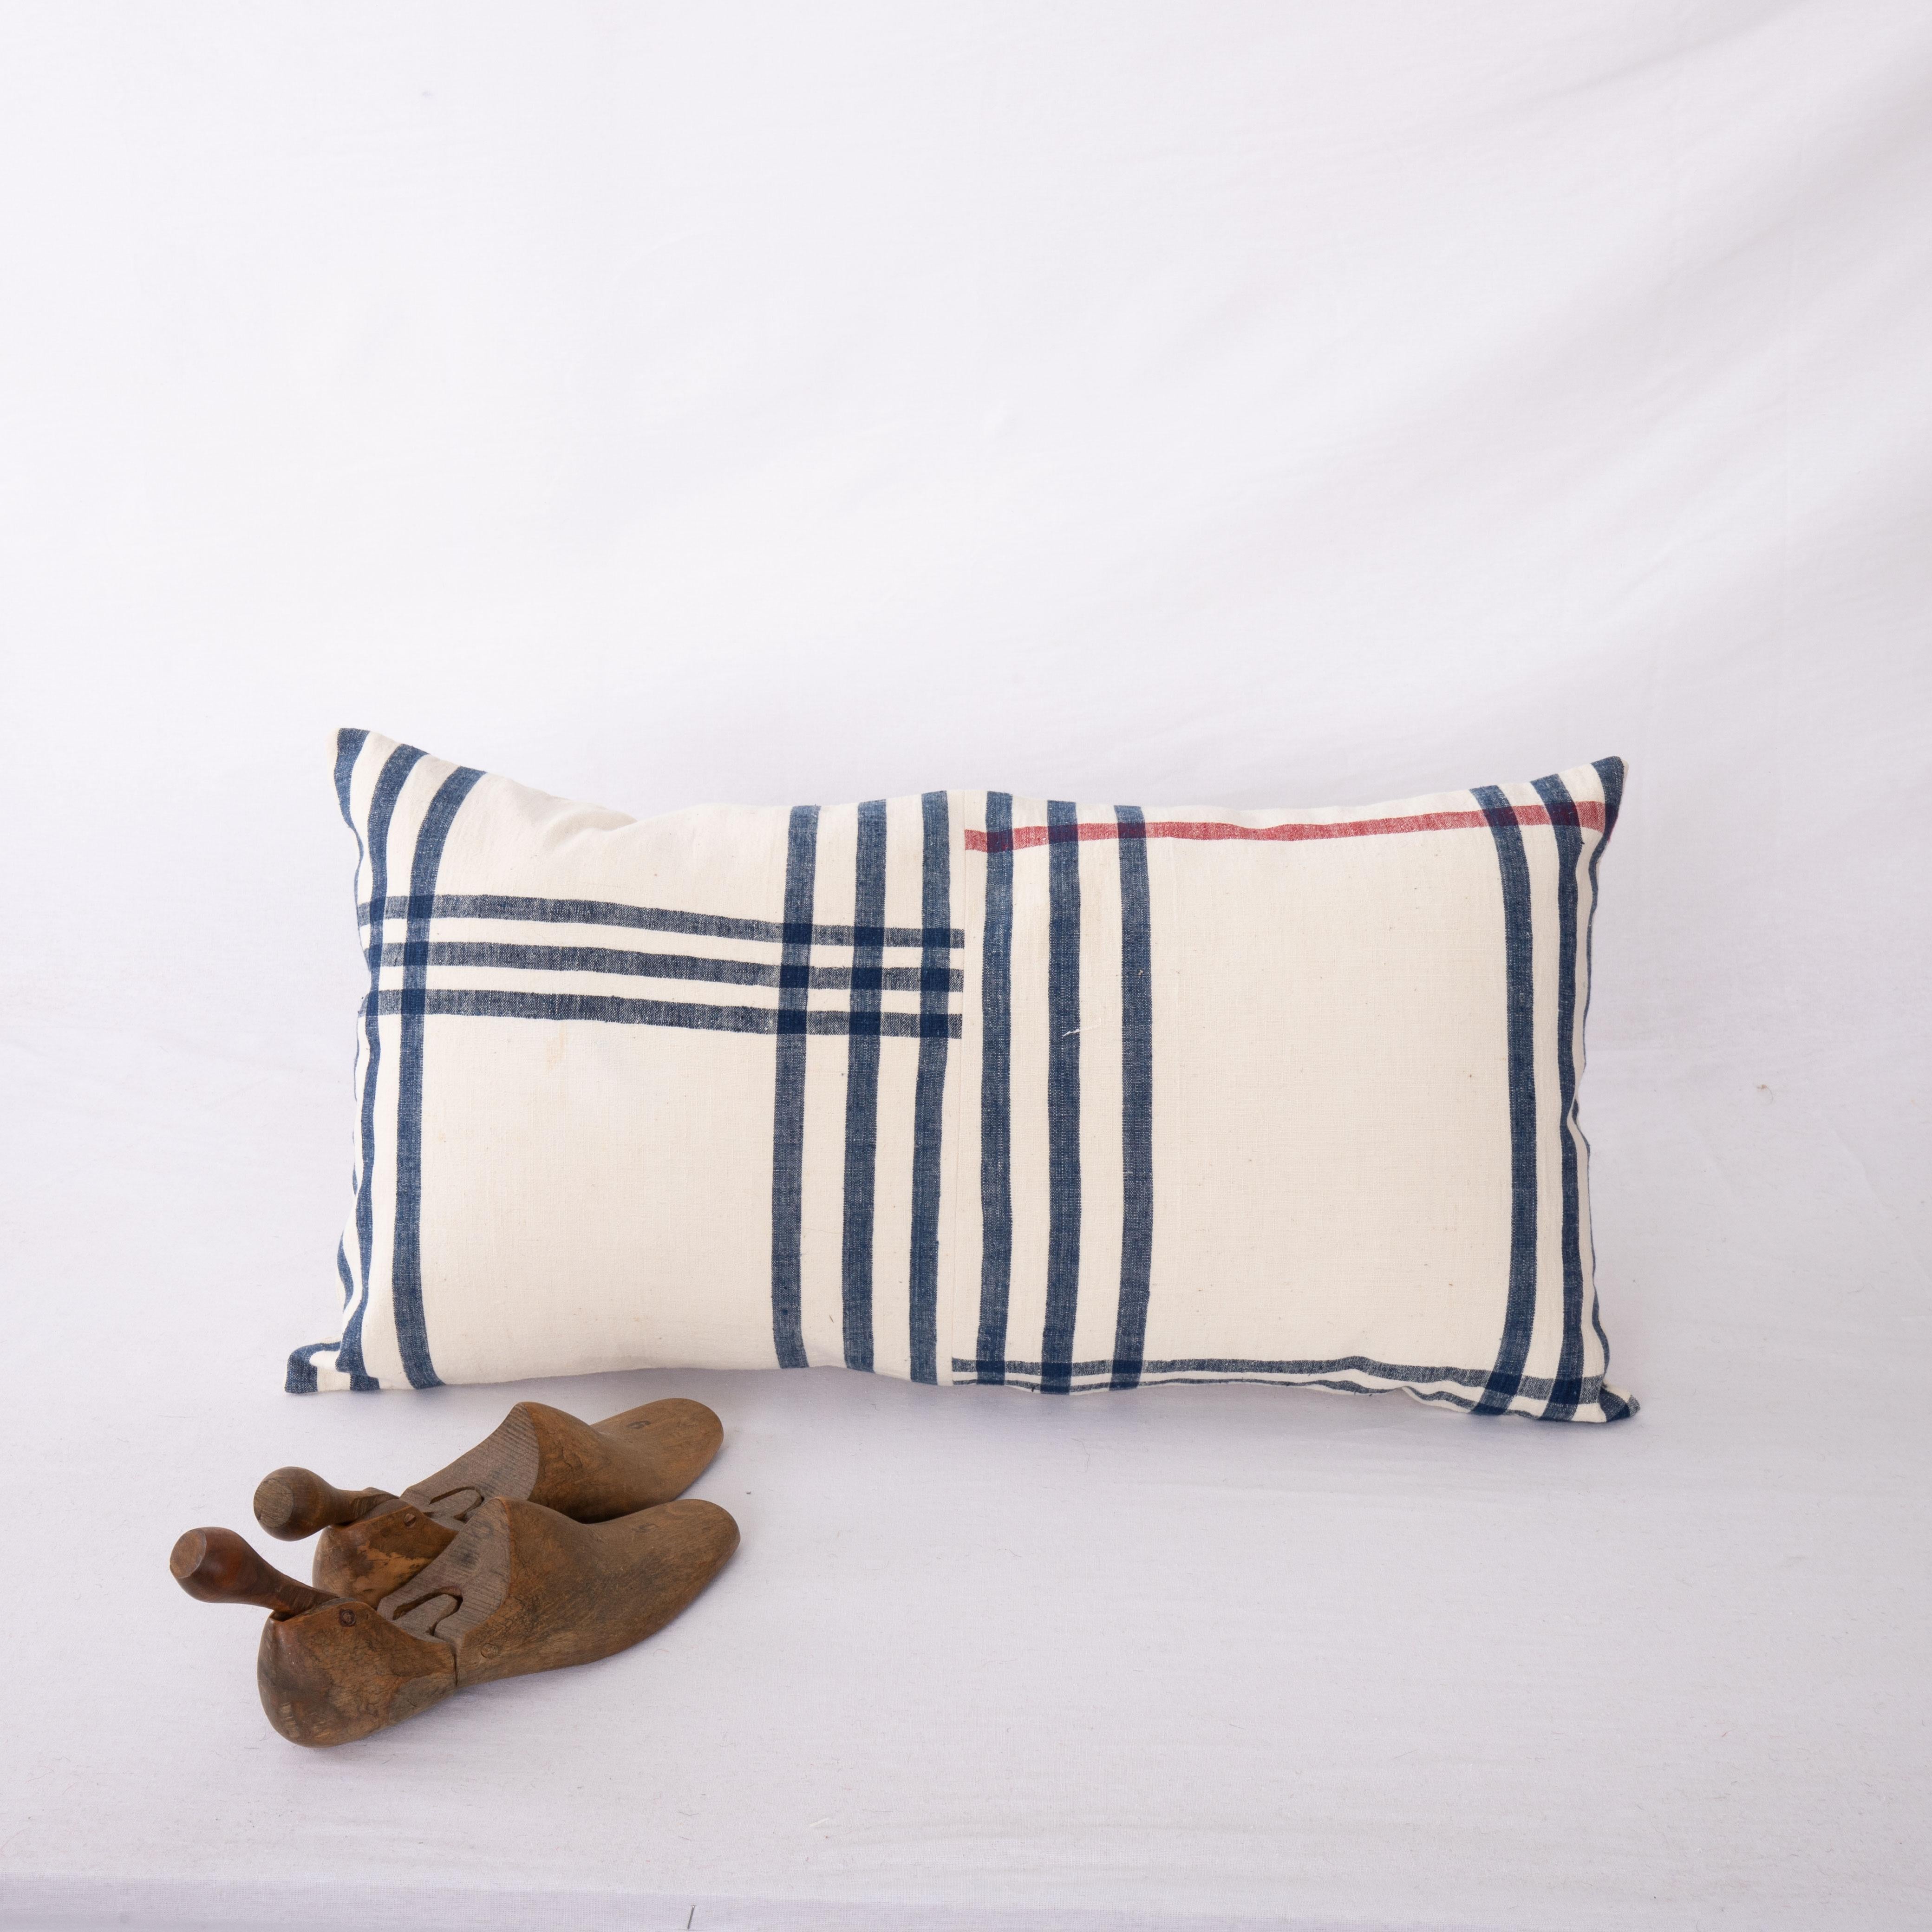 Rustic Lumbar Pillow Cover Made from a Vintage Anatolian Cotton Weaving, Mid 20th C. For Sale